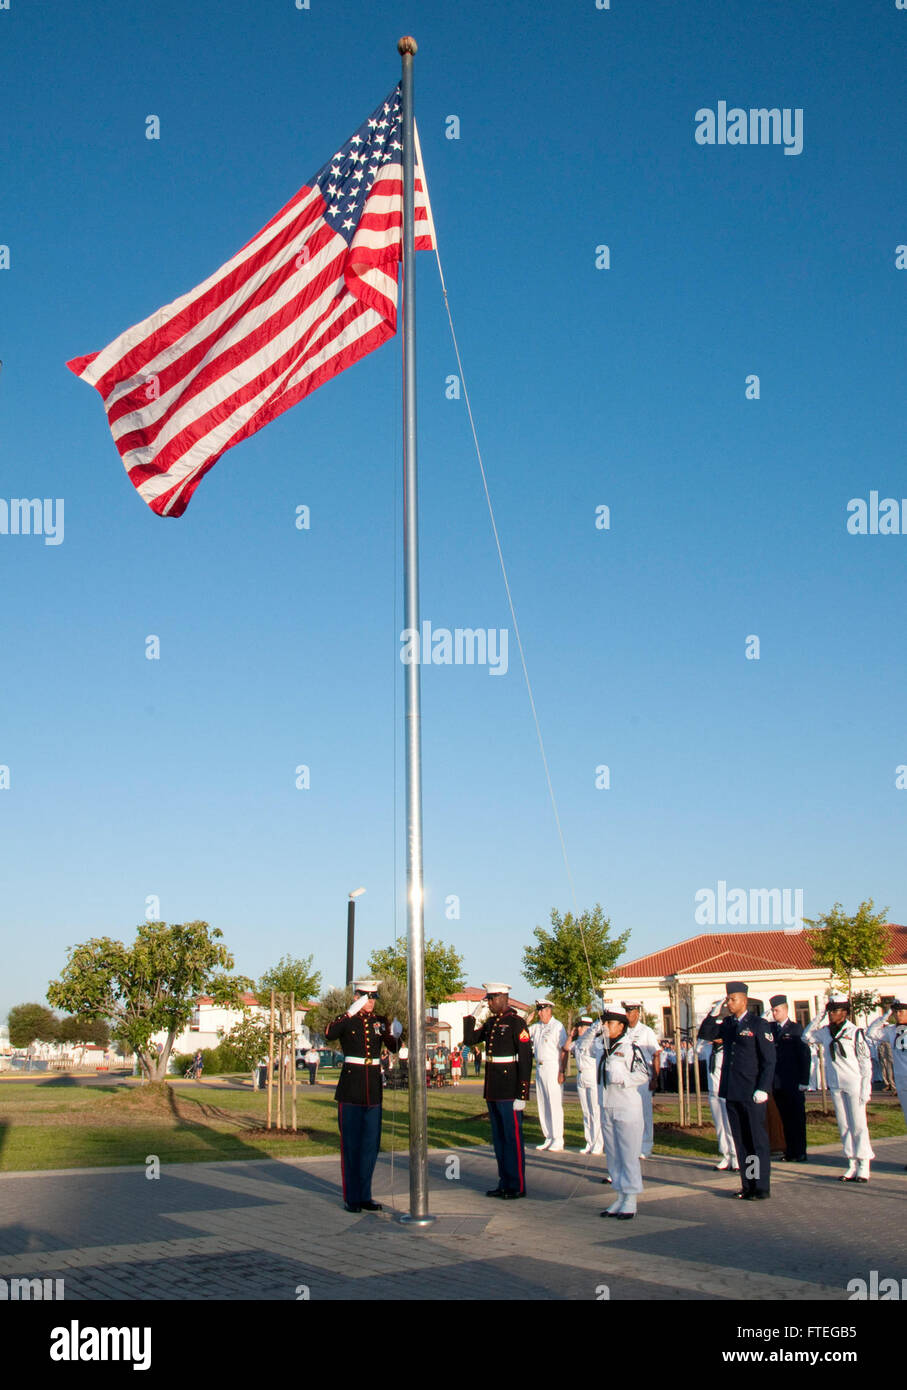 NAVAL STATION ROTA, Spain (July 2, 2015) – Service members assigned to Commander, U.S. Naval Activities Spain, stand at attention and salute the ensign during the annual flag-raising ceremony, July 2. While raising the flag is a daily occurrence on most U.S. military installations around the world, Naval Station Rota is only permitted to fly the American flag with special permission from the base’s Spanish admiral in chief in accordance with the Agreement on Defense Cooperation.  (U.S. Navy photo by Mass Communication Specialist 2nd Class Grant Wamack/Released) Stock Photo